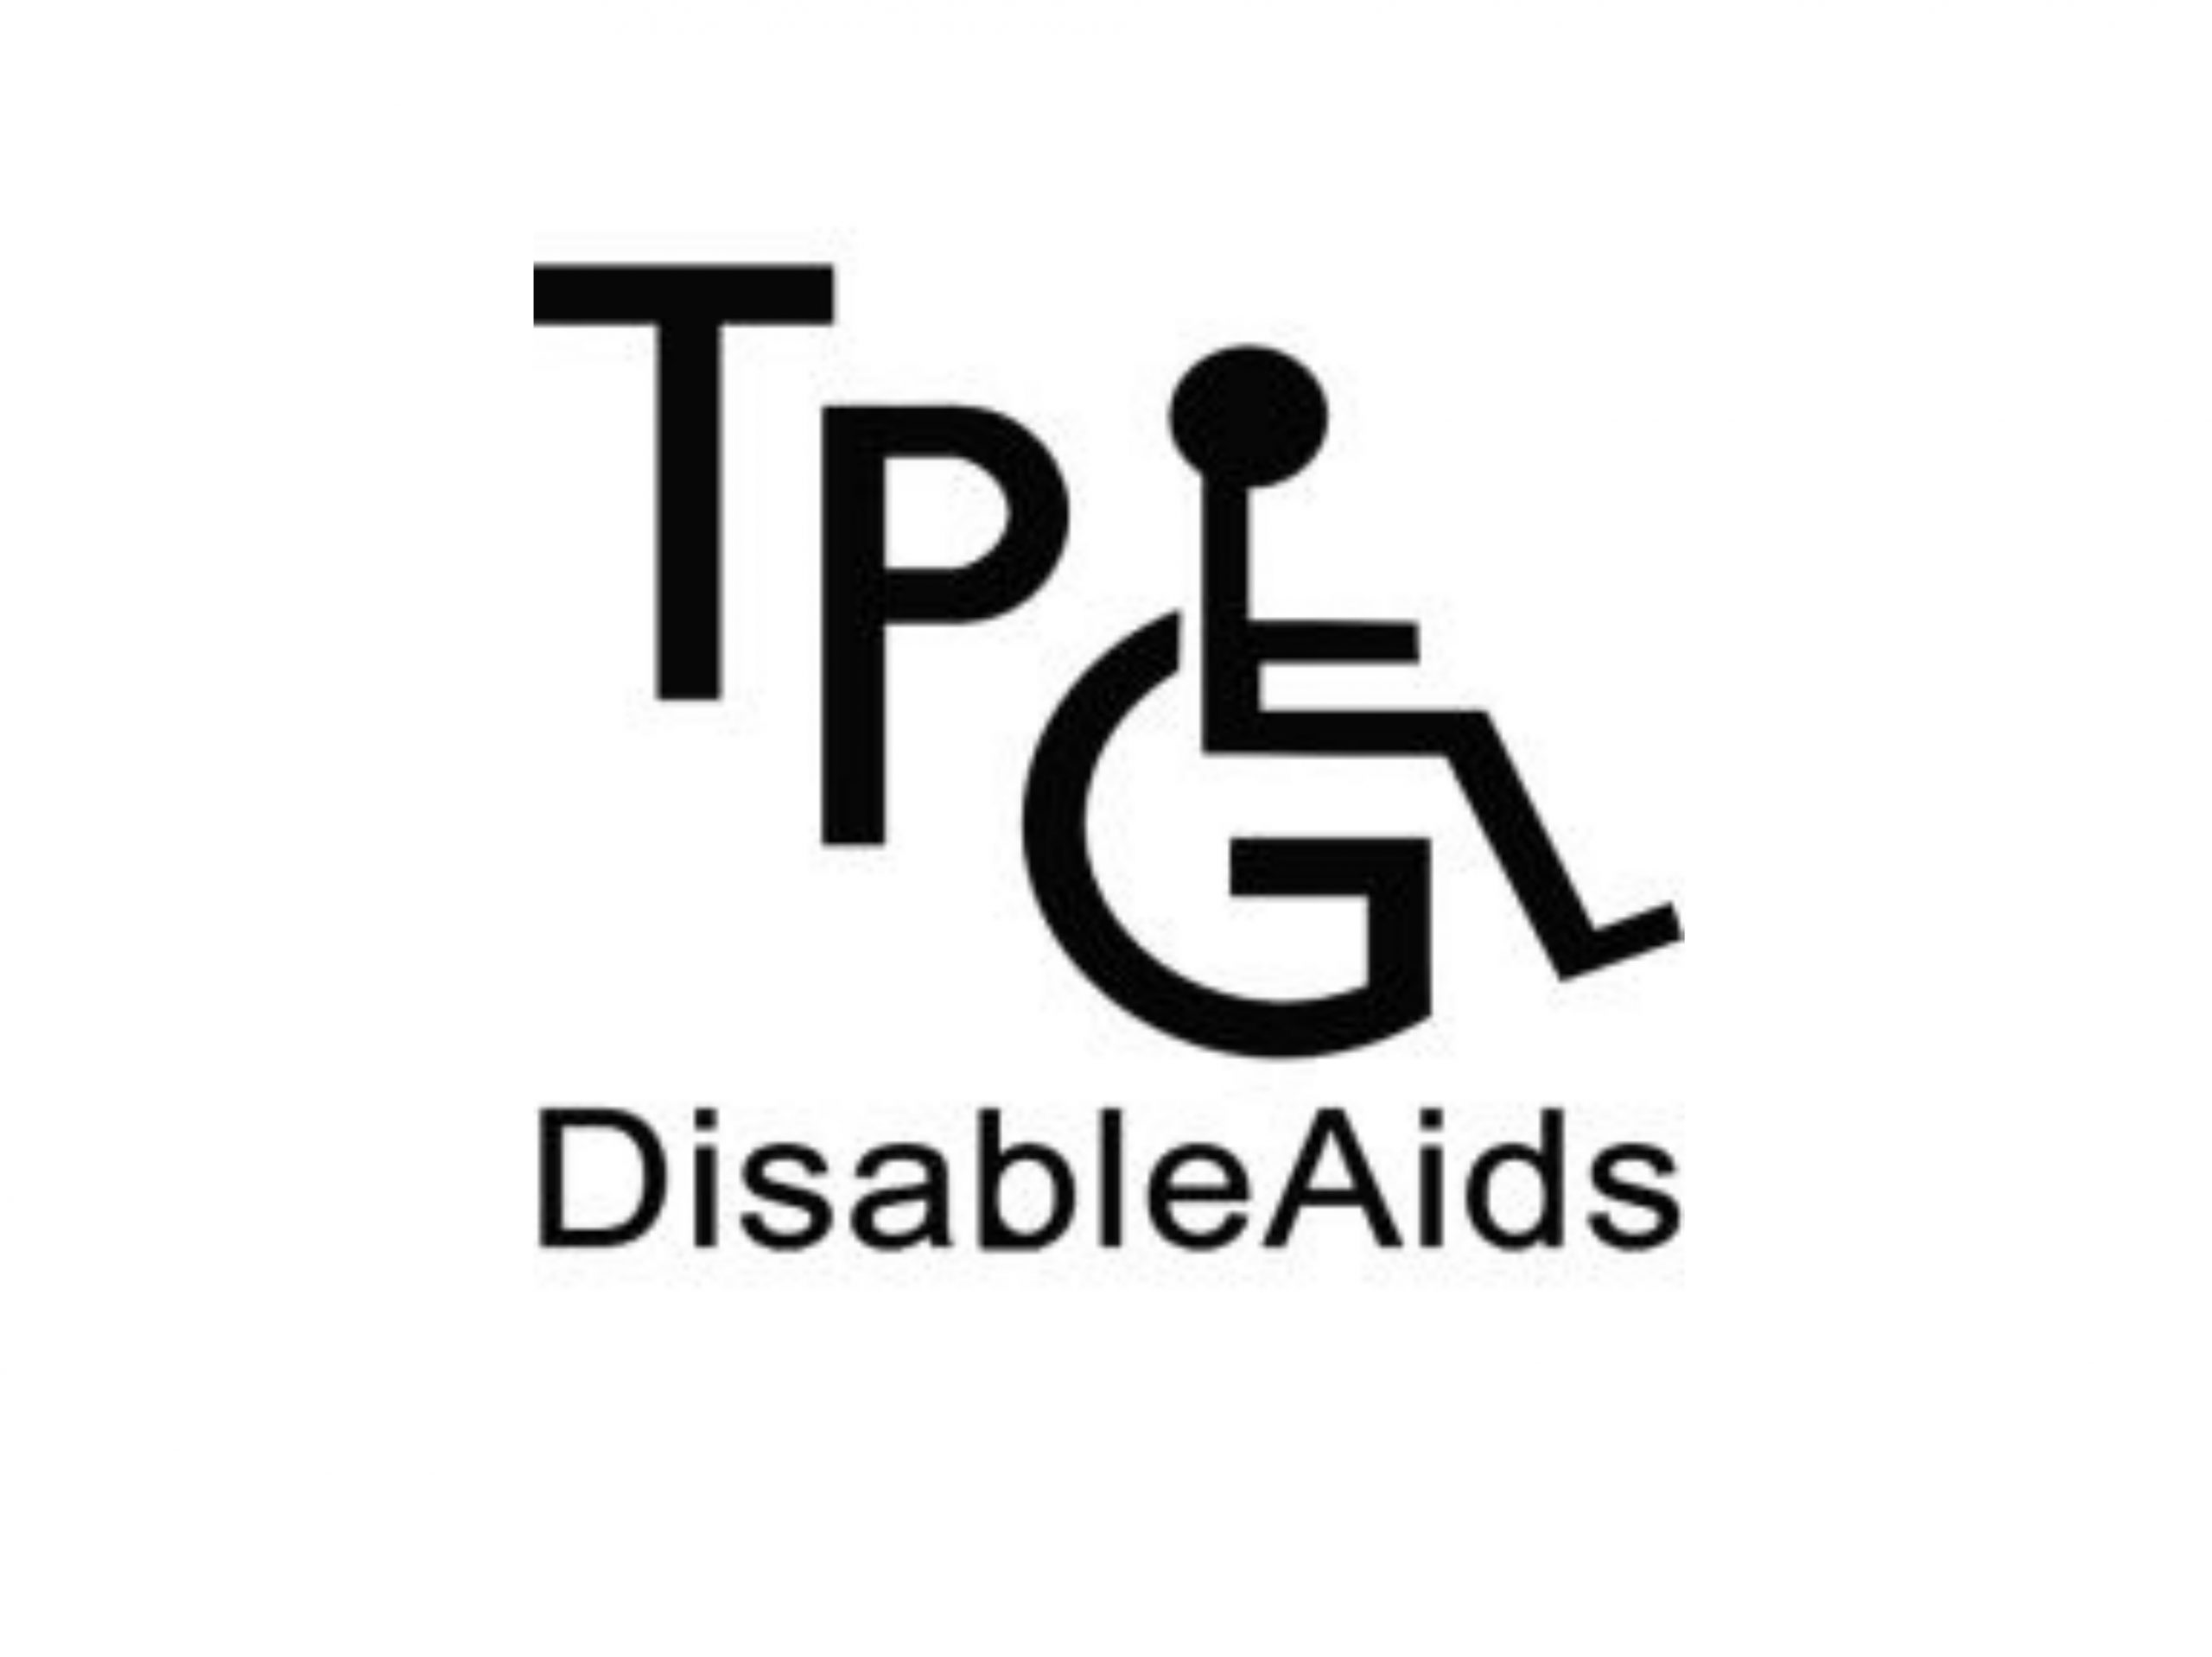 TPG DisableAids Limited comes to the help of Local Voluntary Organisation